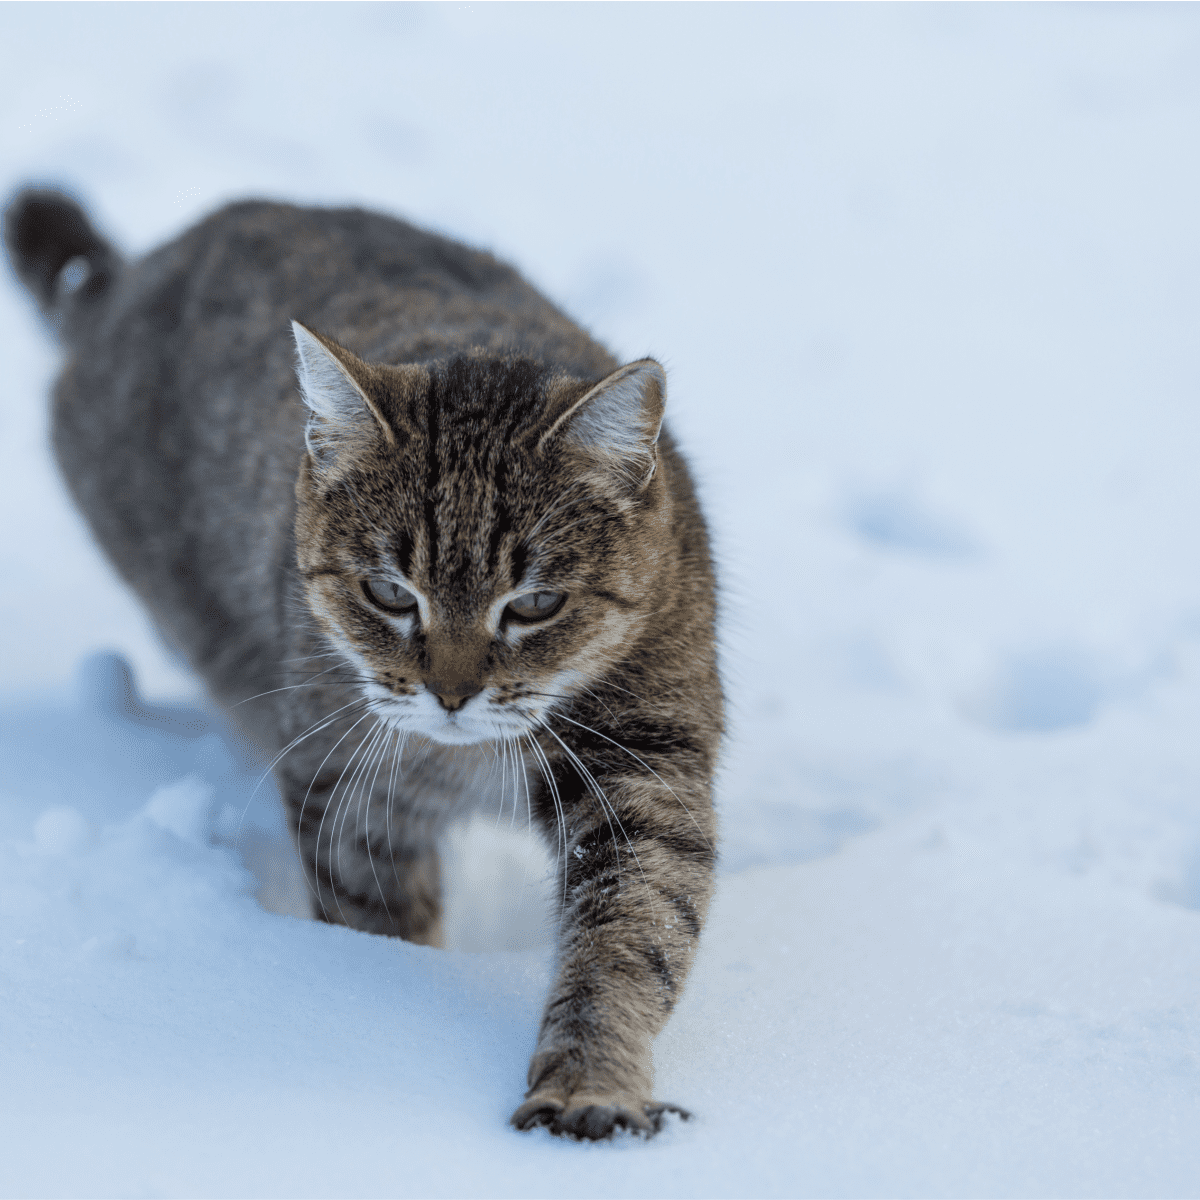 Trapping of feral cats-using soft net traps - PestSmart